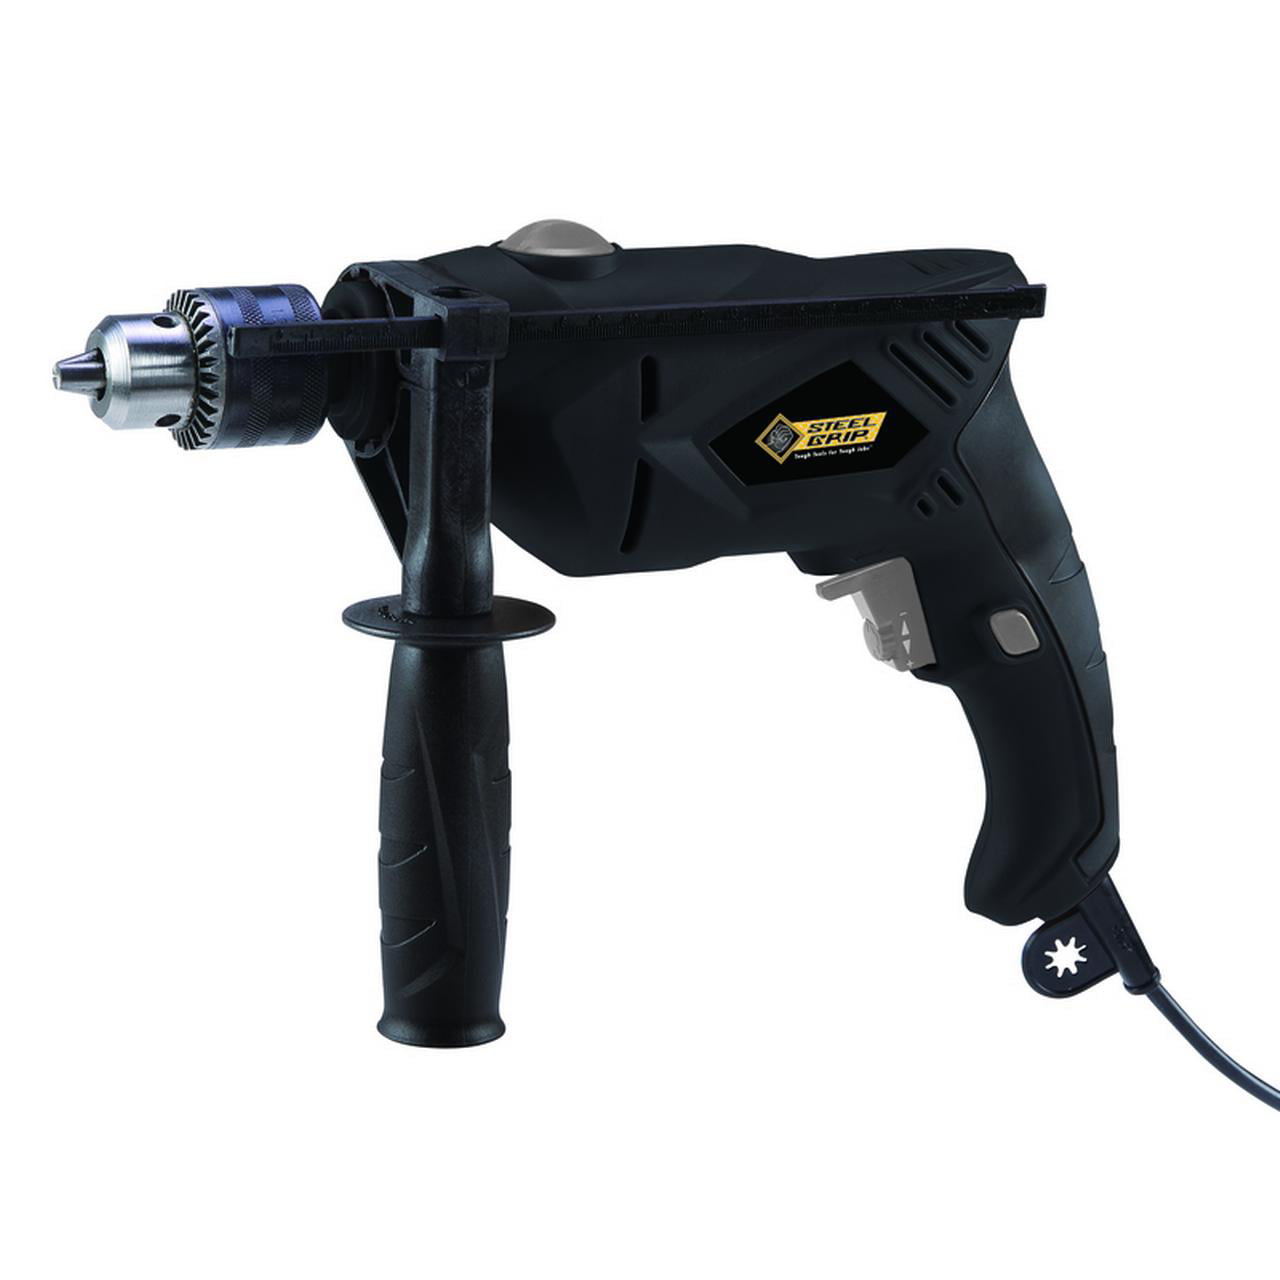 Milwaukee 5376-20 1/2" Single Speed Hammer Drill for sale online 